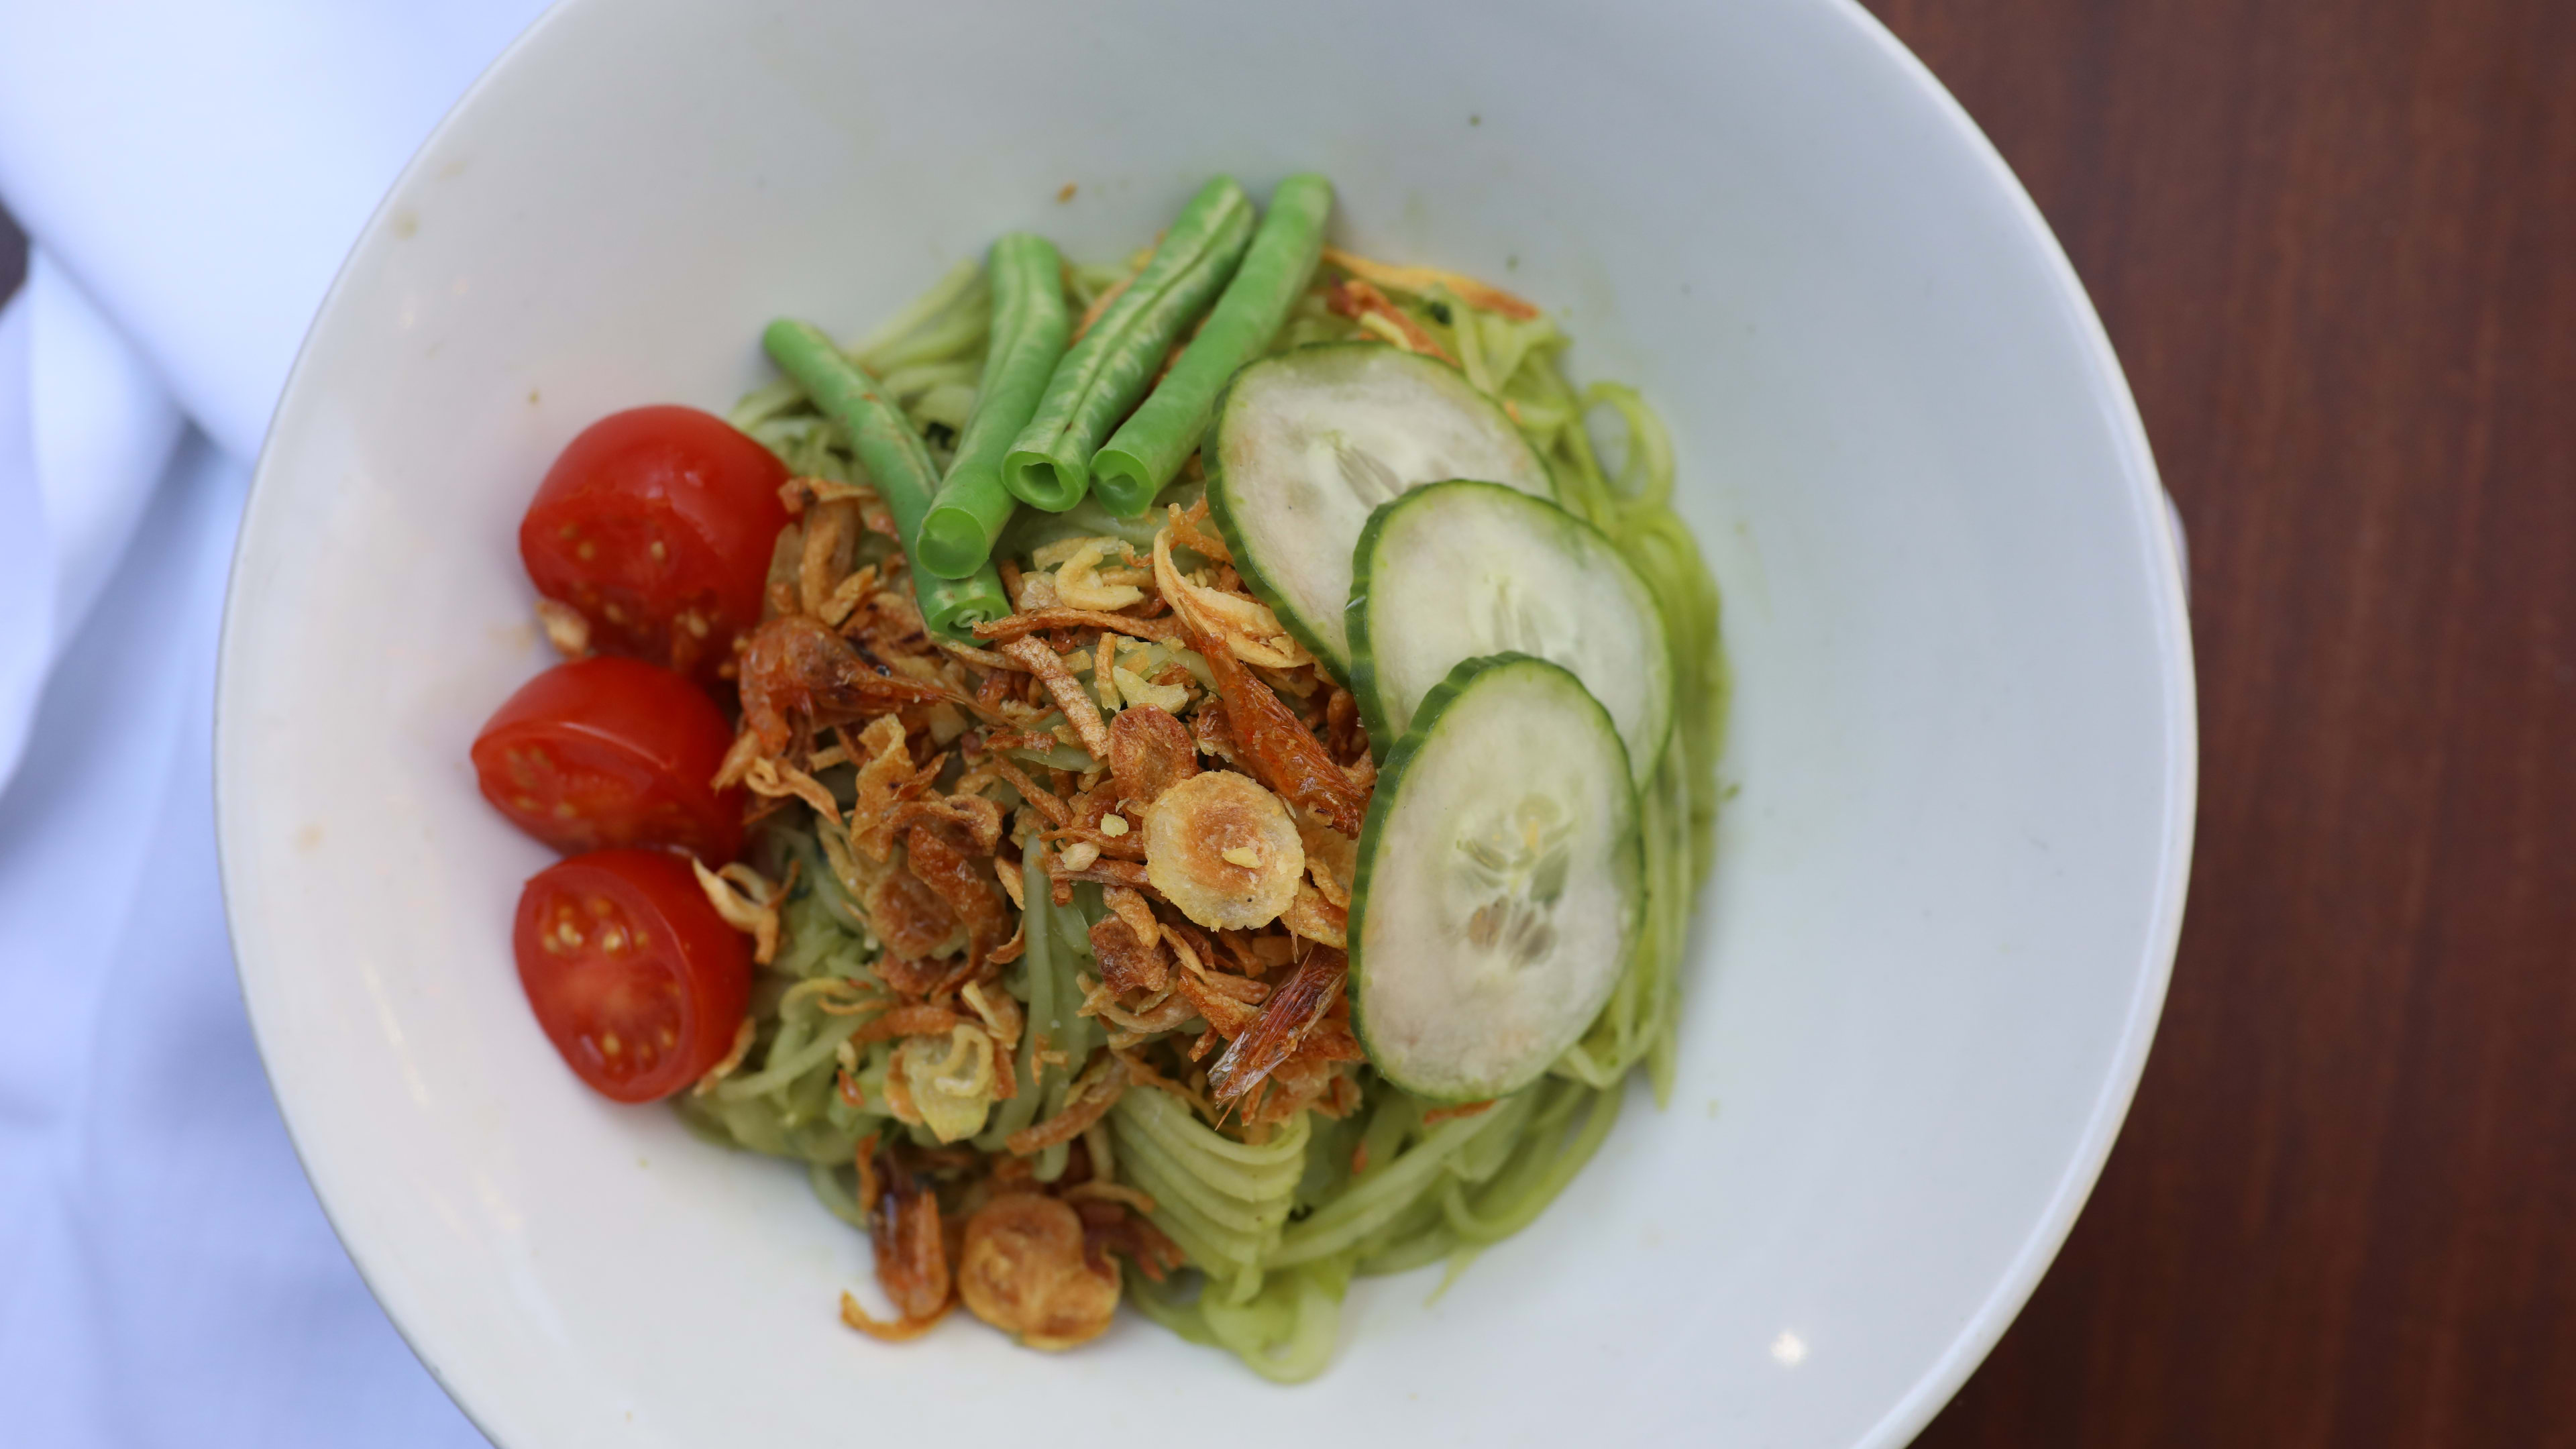 A dish with noodles, vegetables and nuts from Sway.